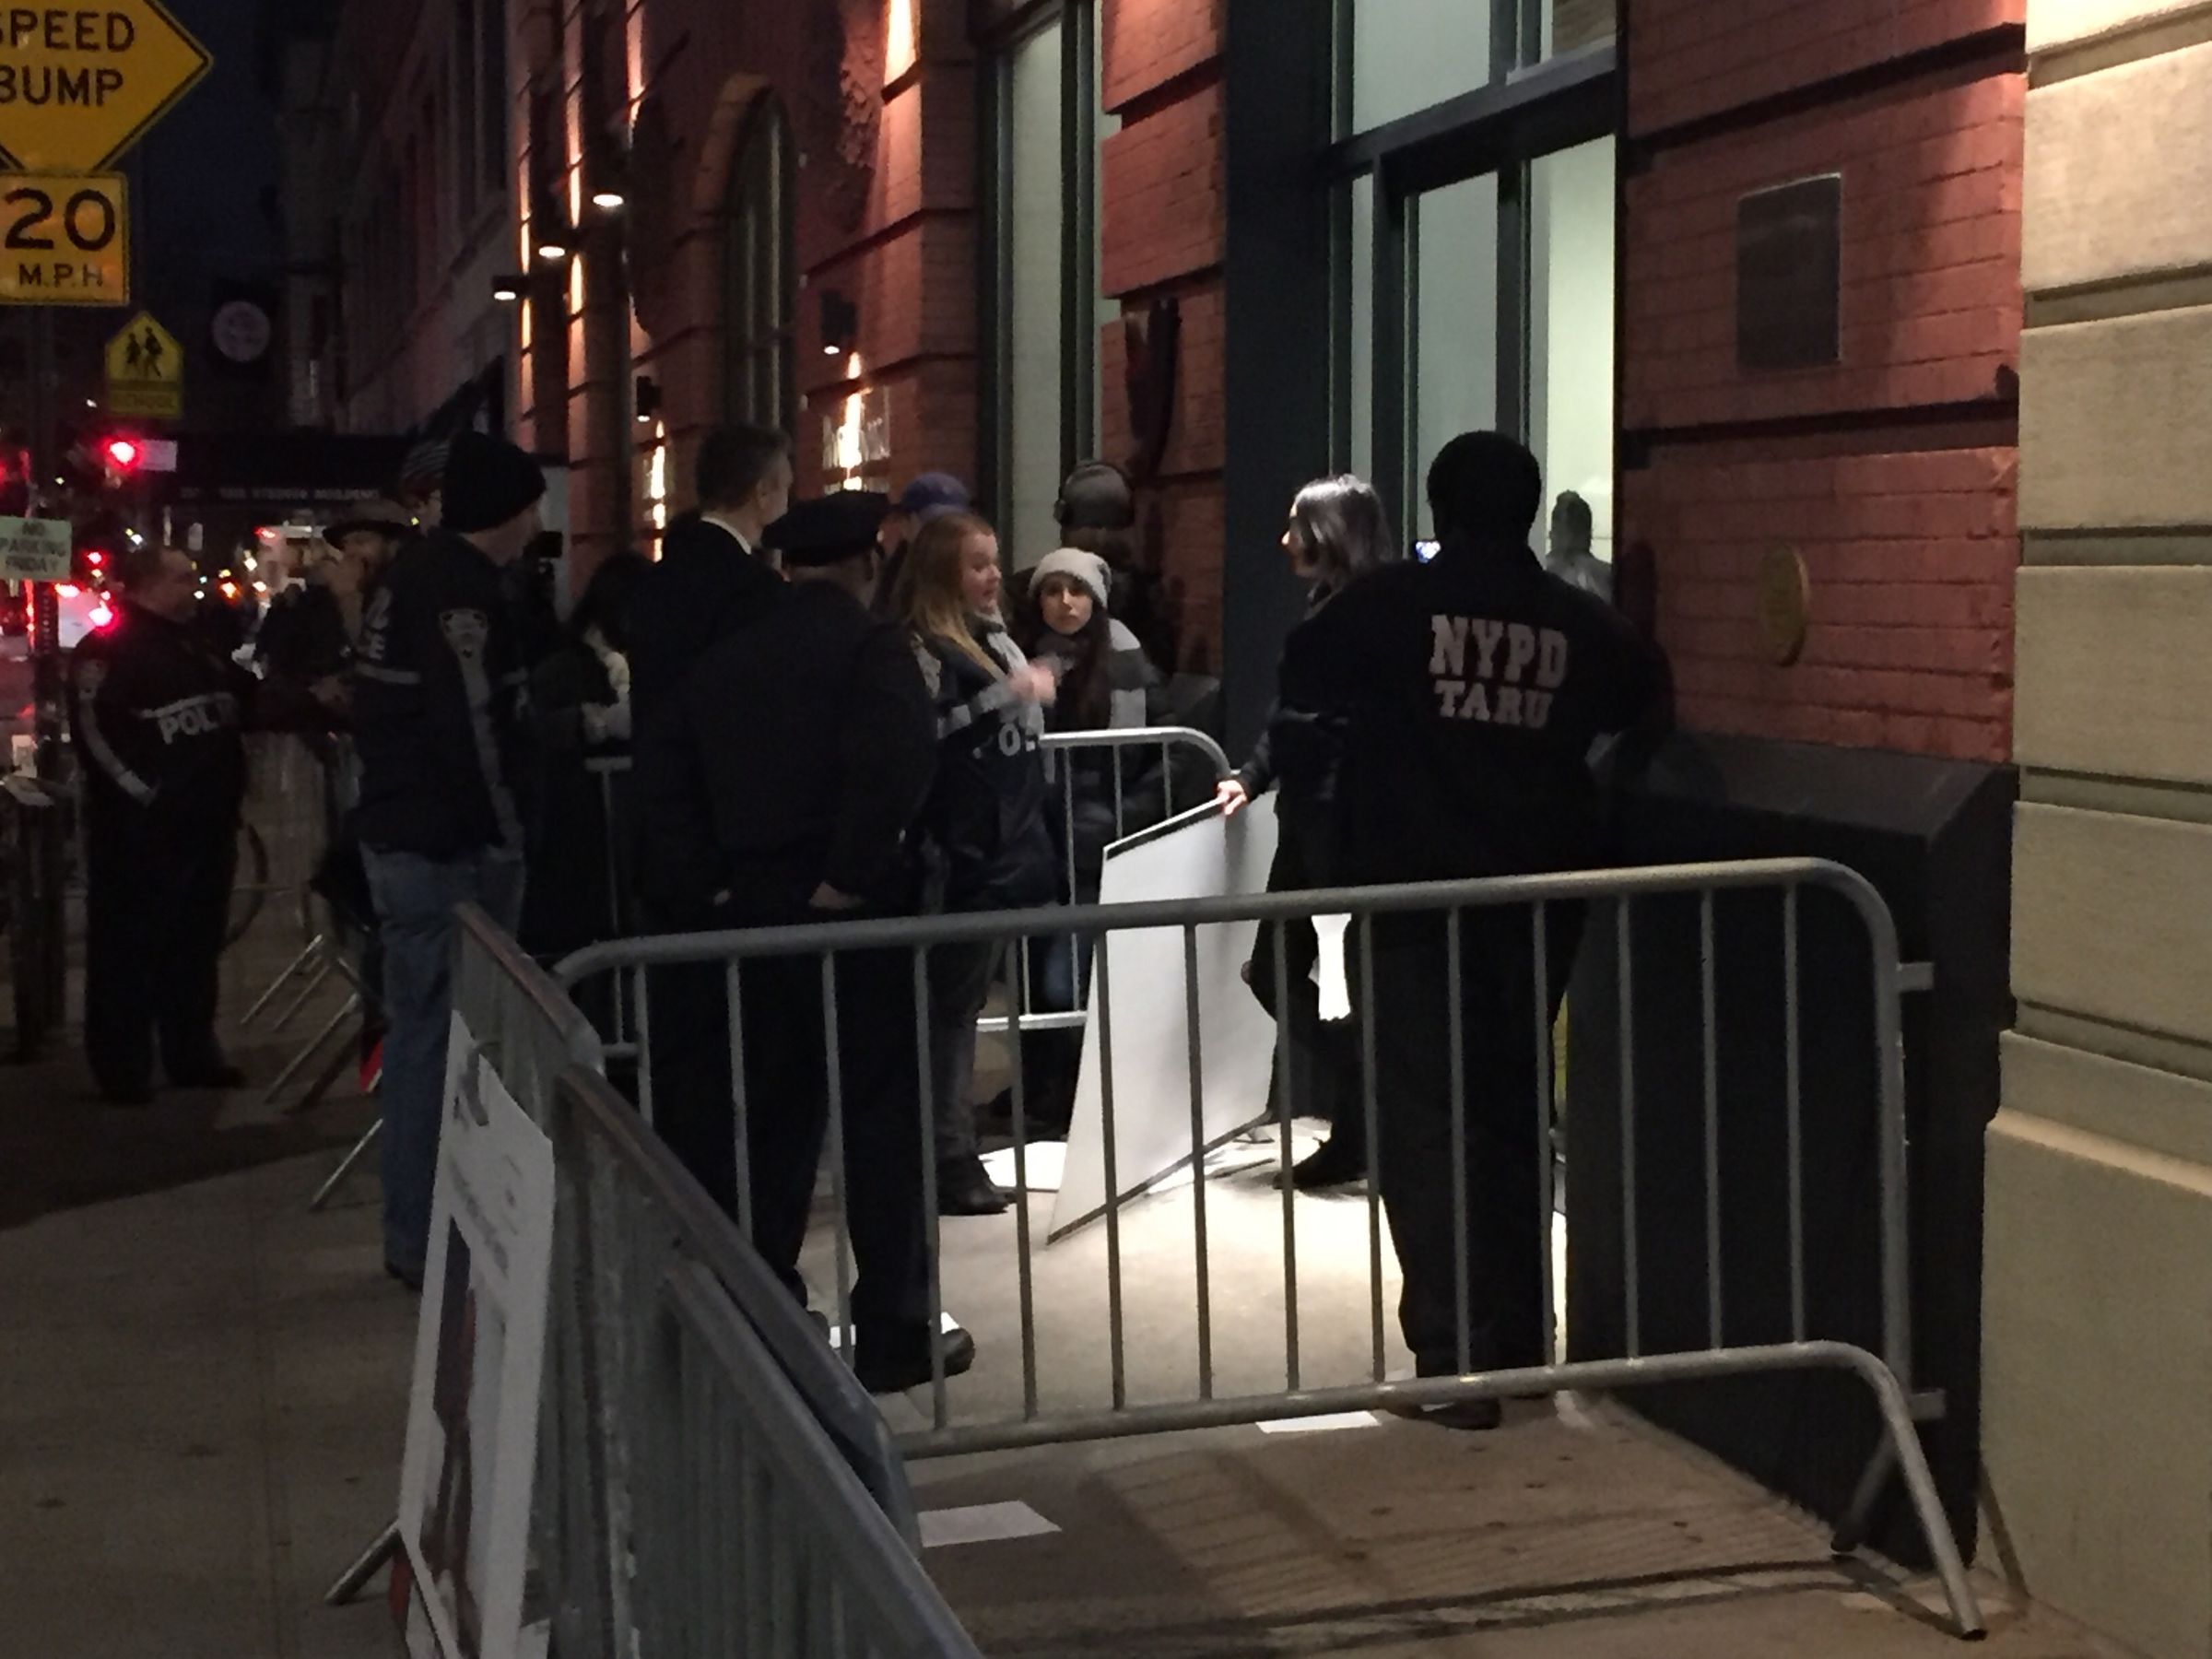 Police negotiate with far-right activist Laura Loomer outside Twitter’s New York headquarters, where she has handcuffed herself.